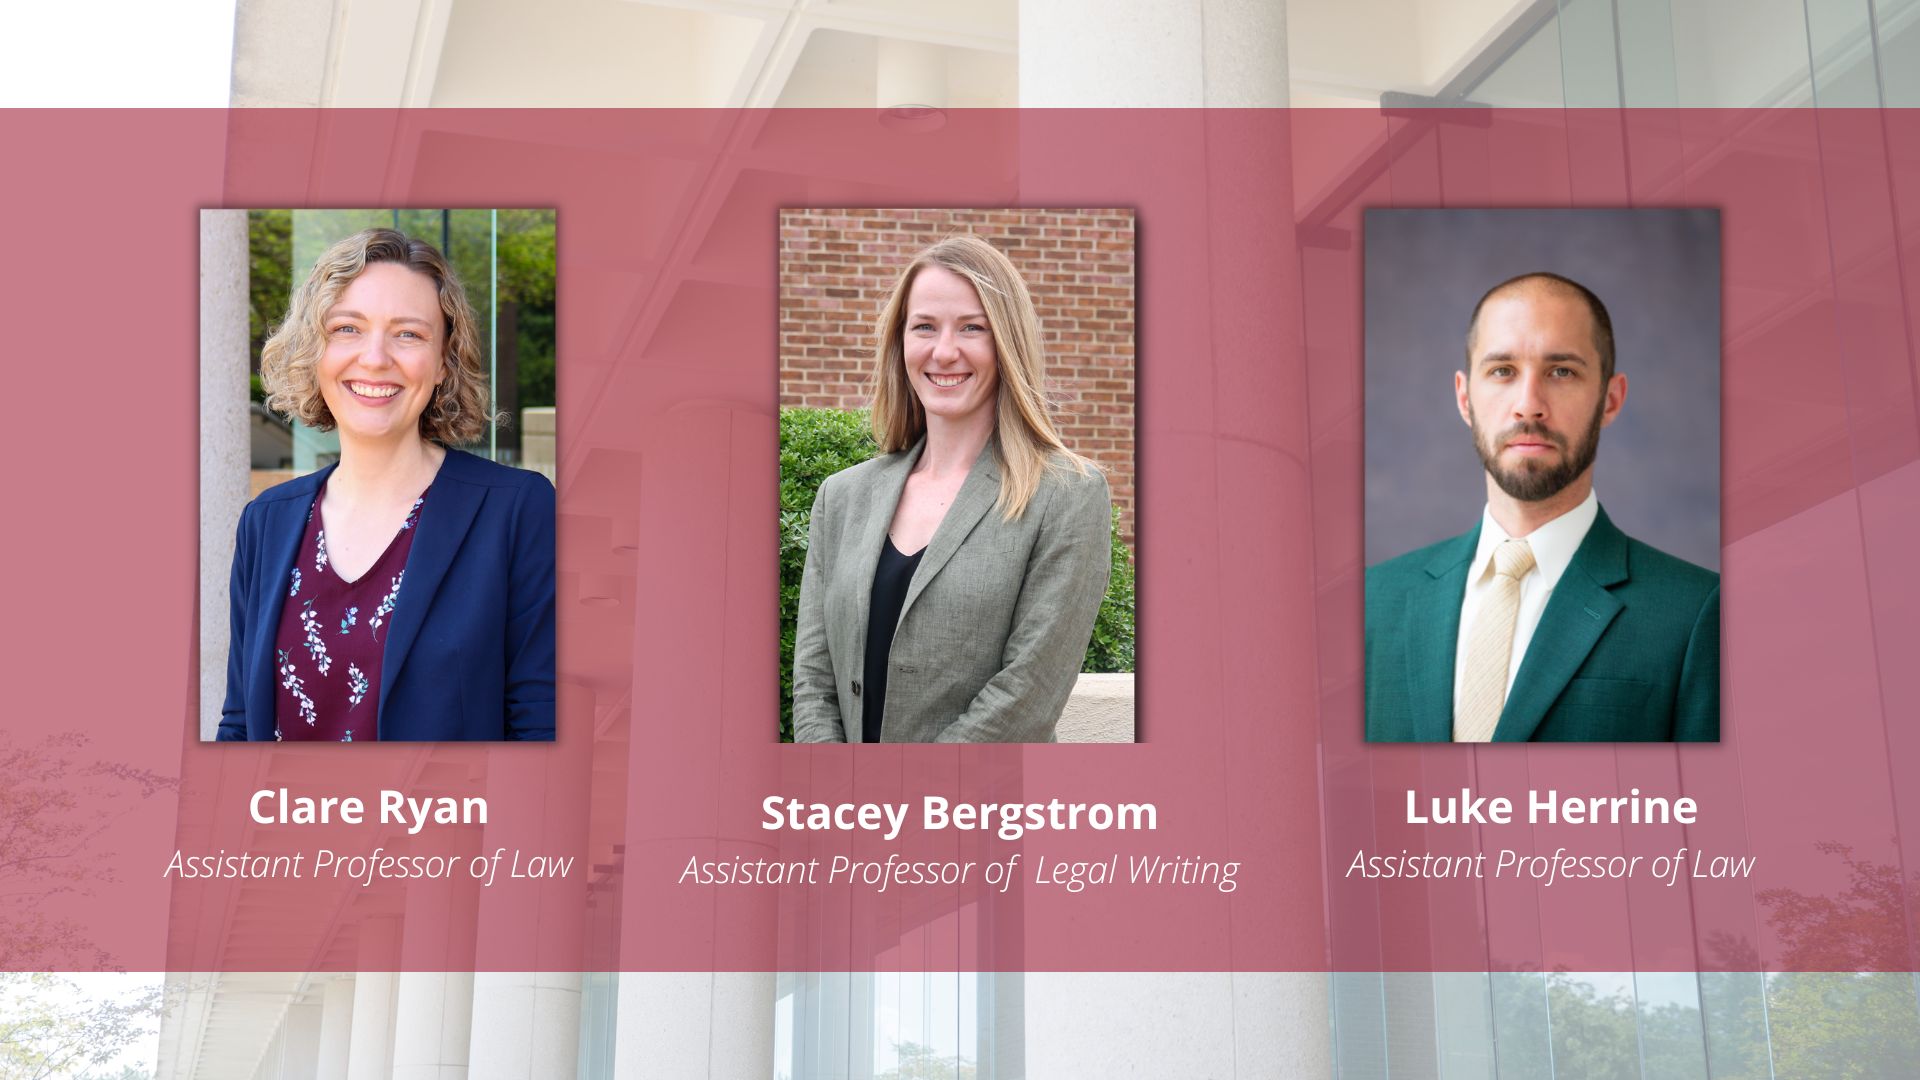 New Faculty at Alabama Law 2022